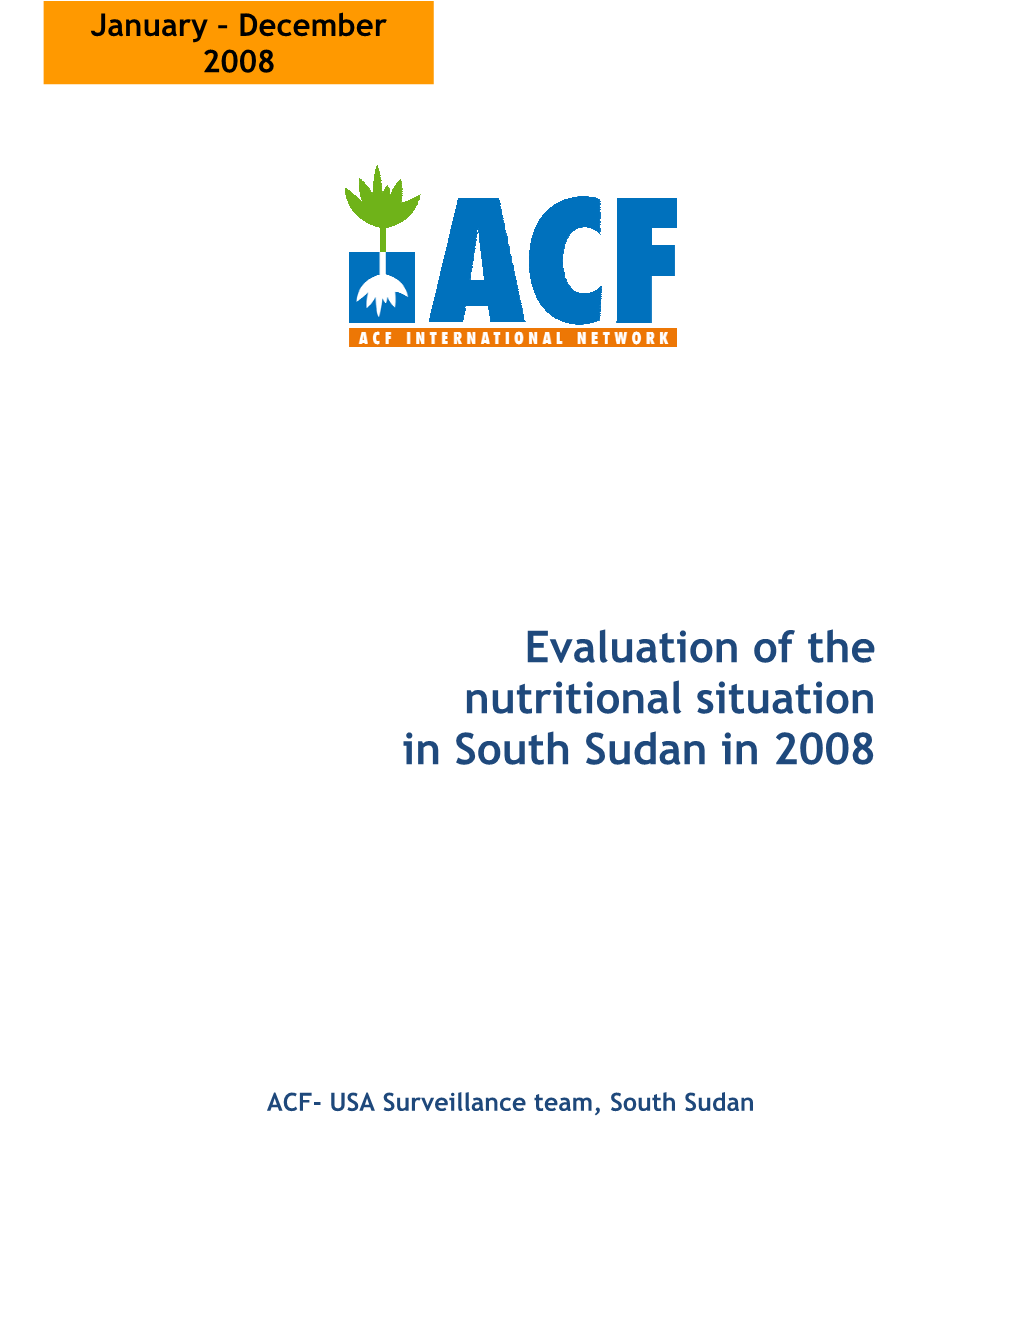 Evaluation of the Nutritional Situation in South Sudan in 2008